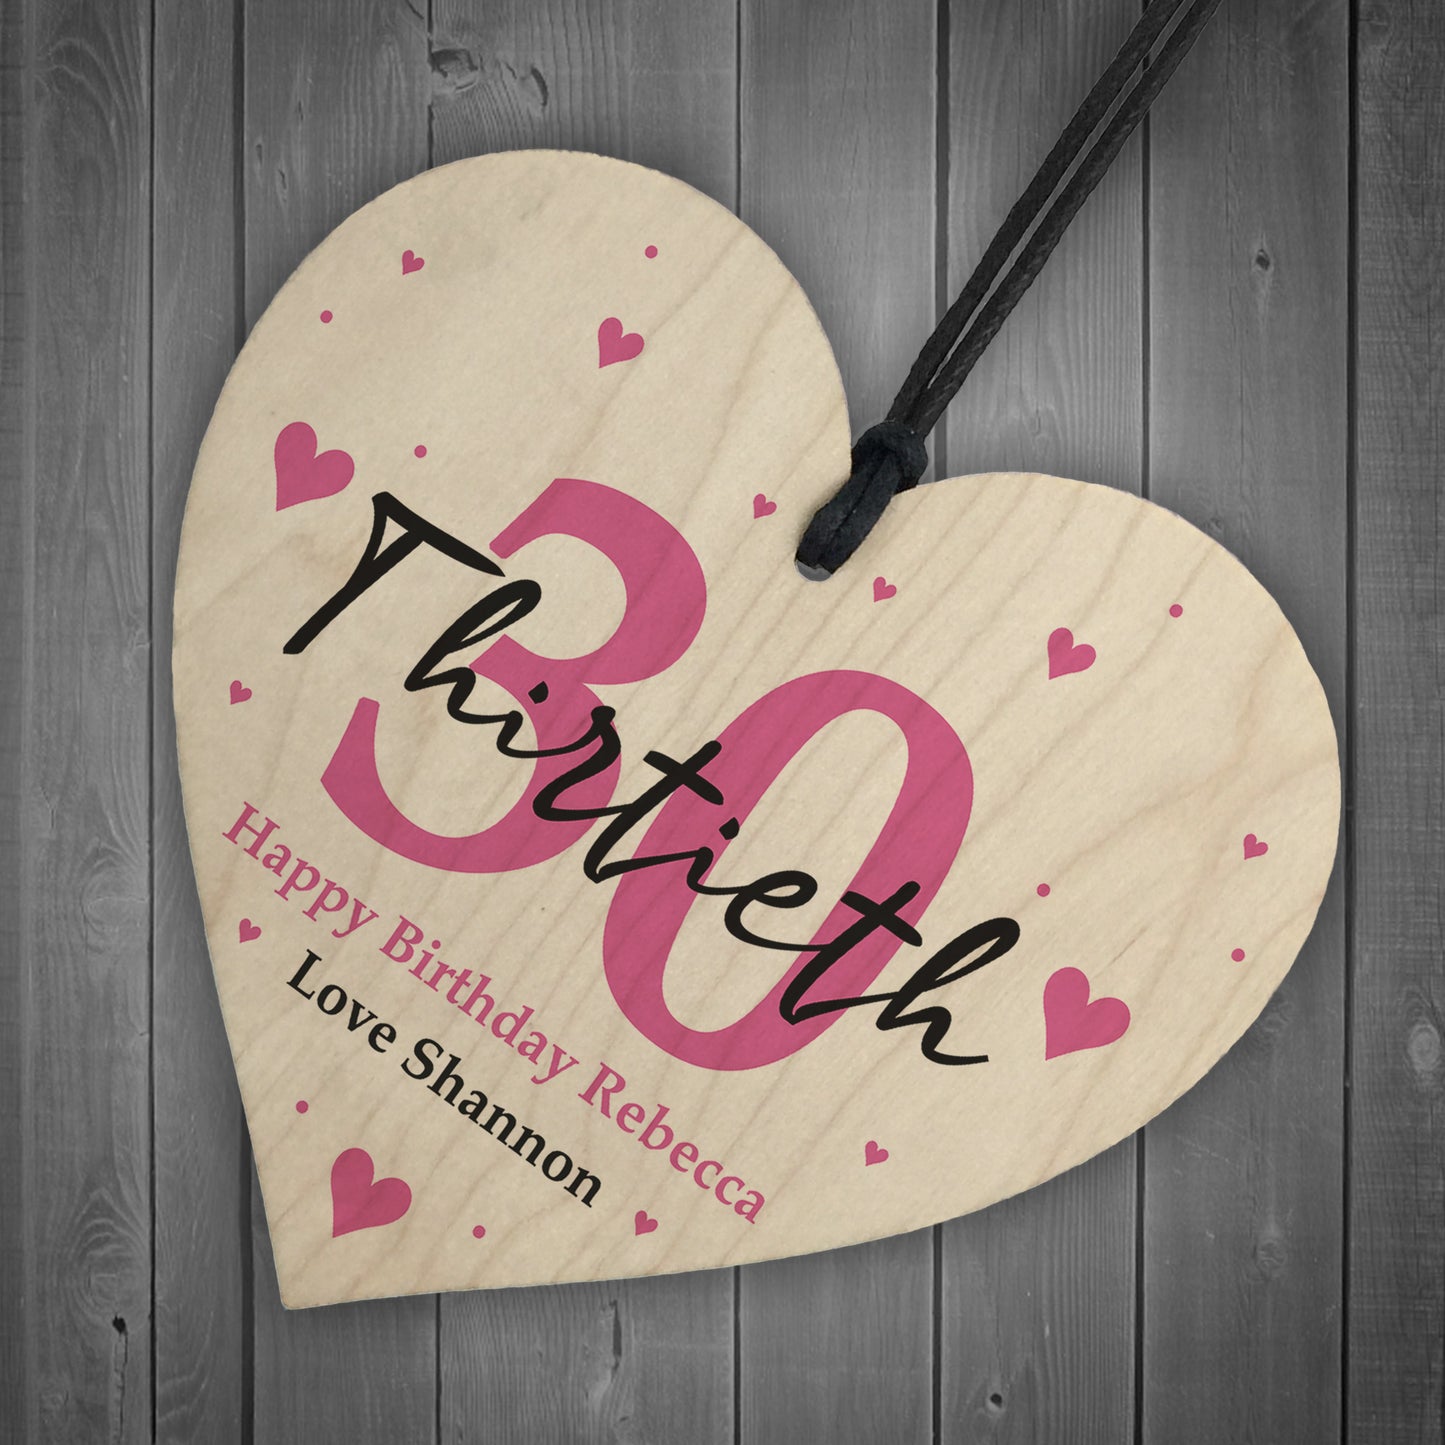 PERSONALISED 40th Birthday Gifts For Mum Auntie Sister Heart